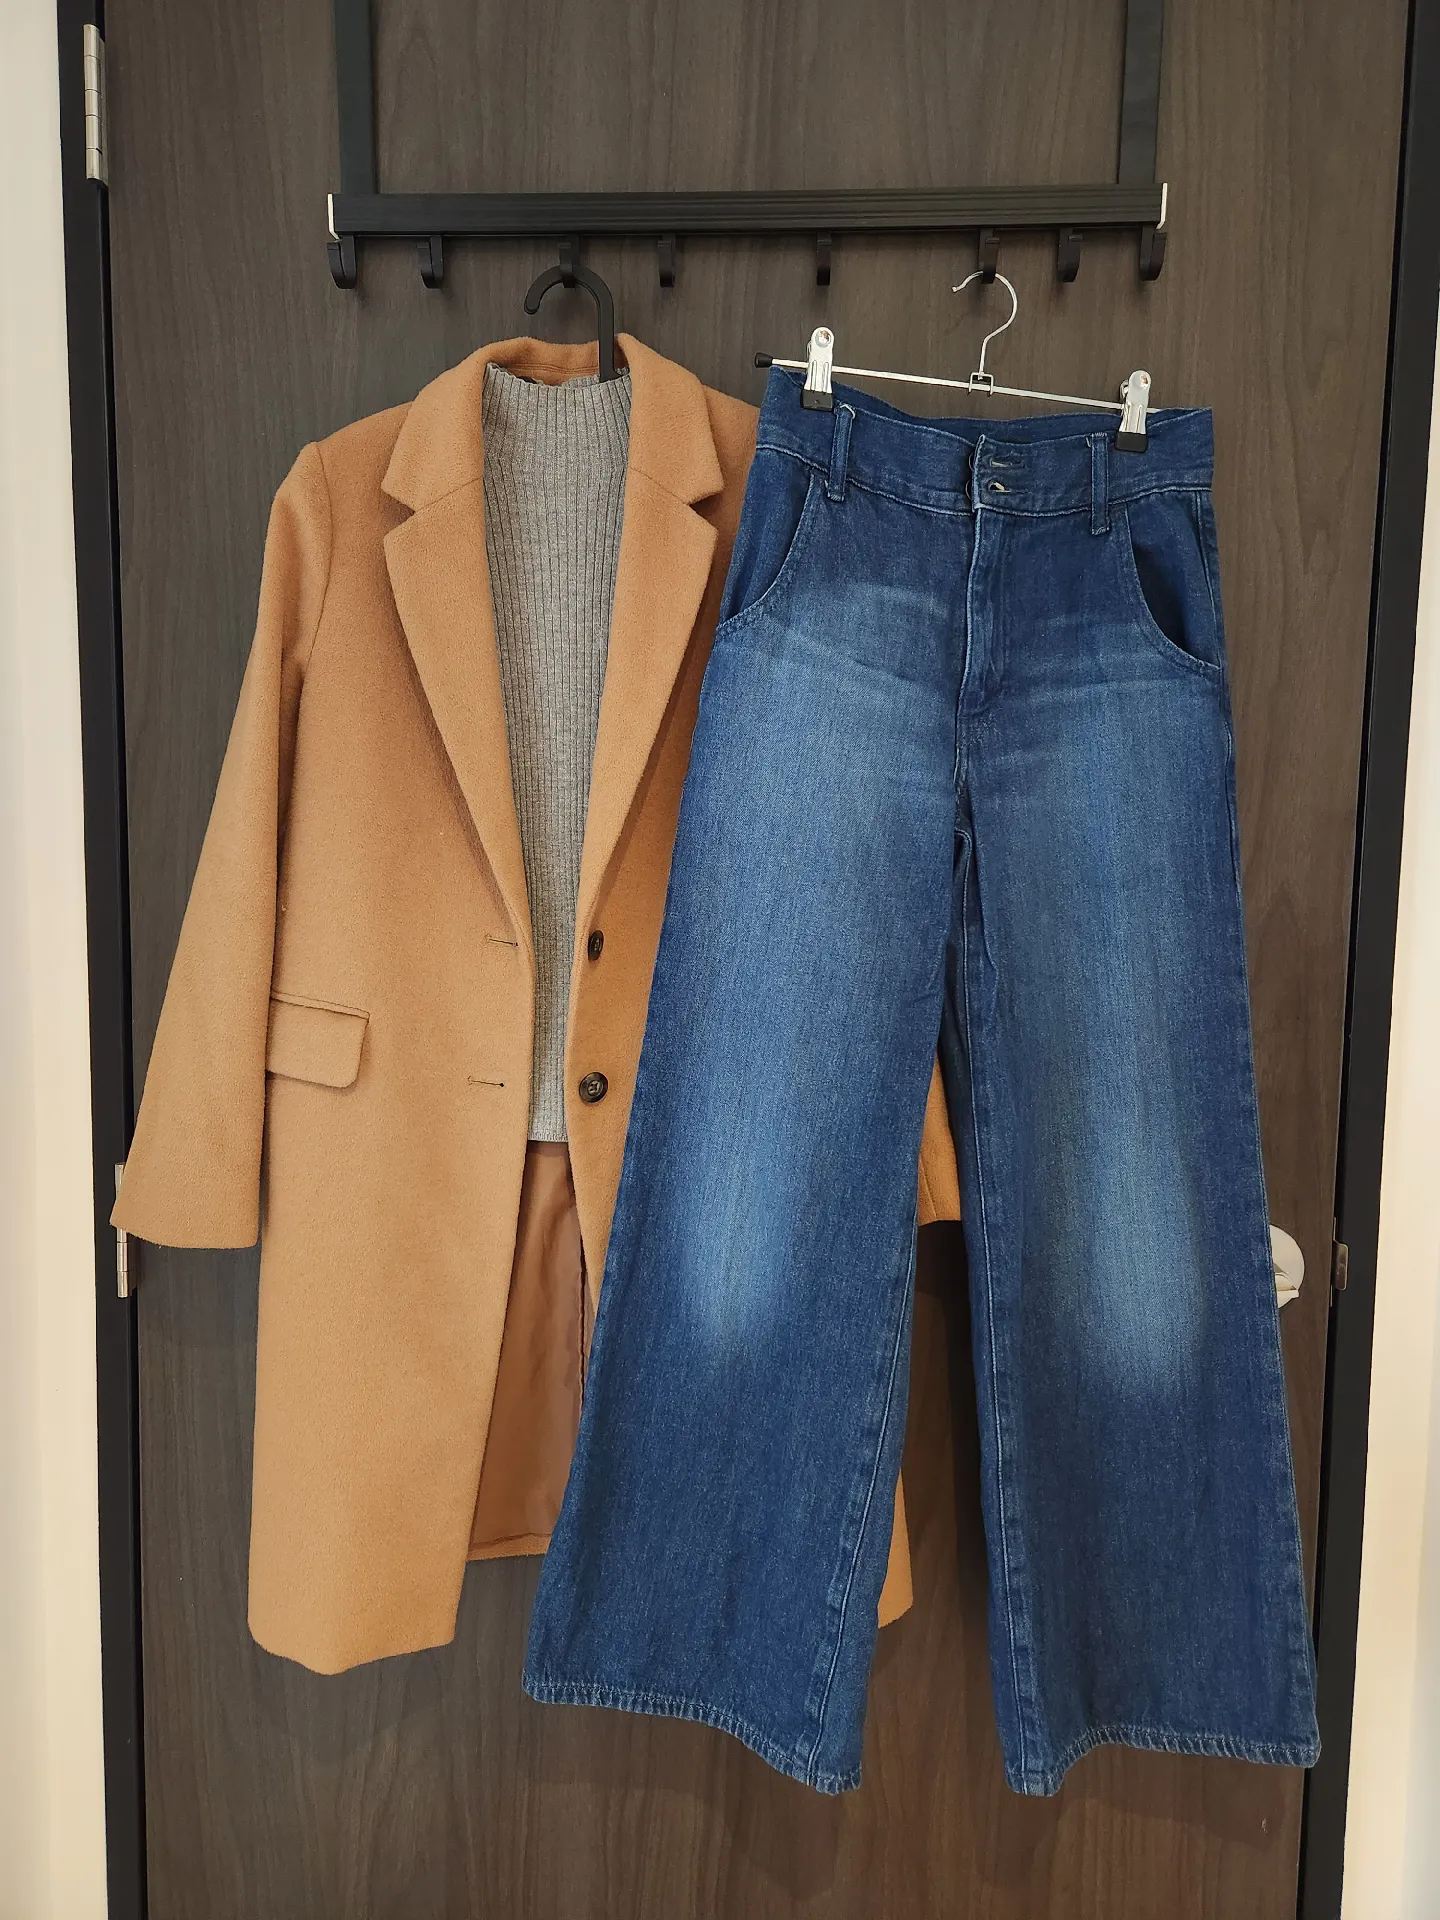 A 30s travel capsule wardrobe, Gallery posted by Vivian